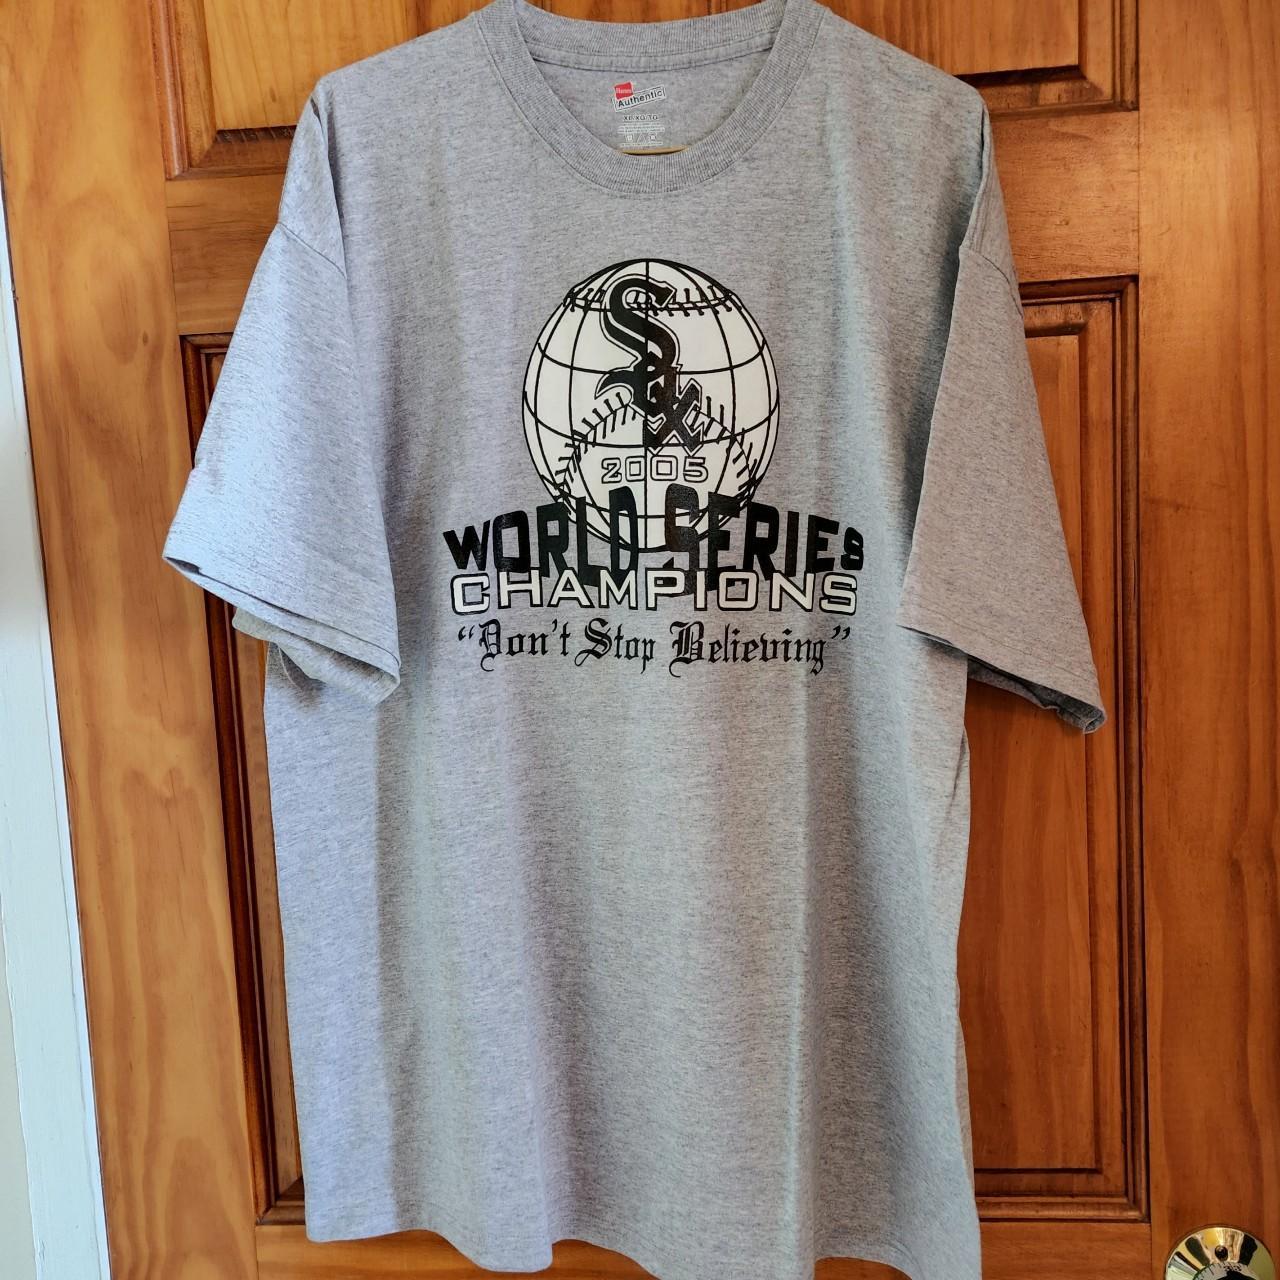 Vintage Chicago White Sox 2005 World Series Champions T-Shirt Size Large NEW